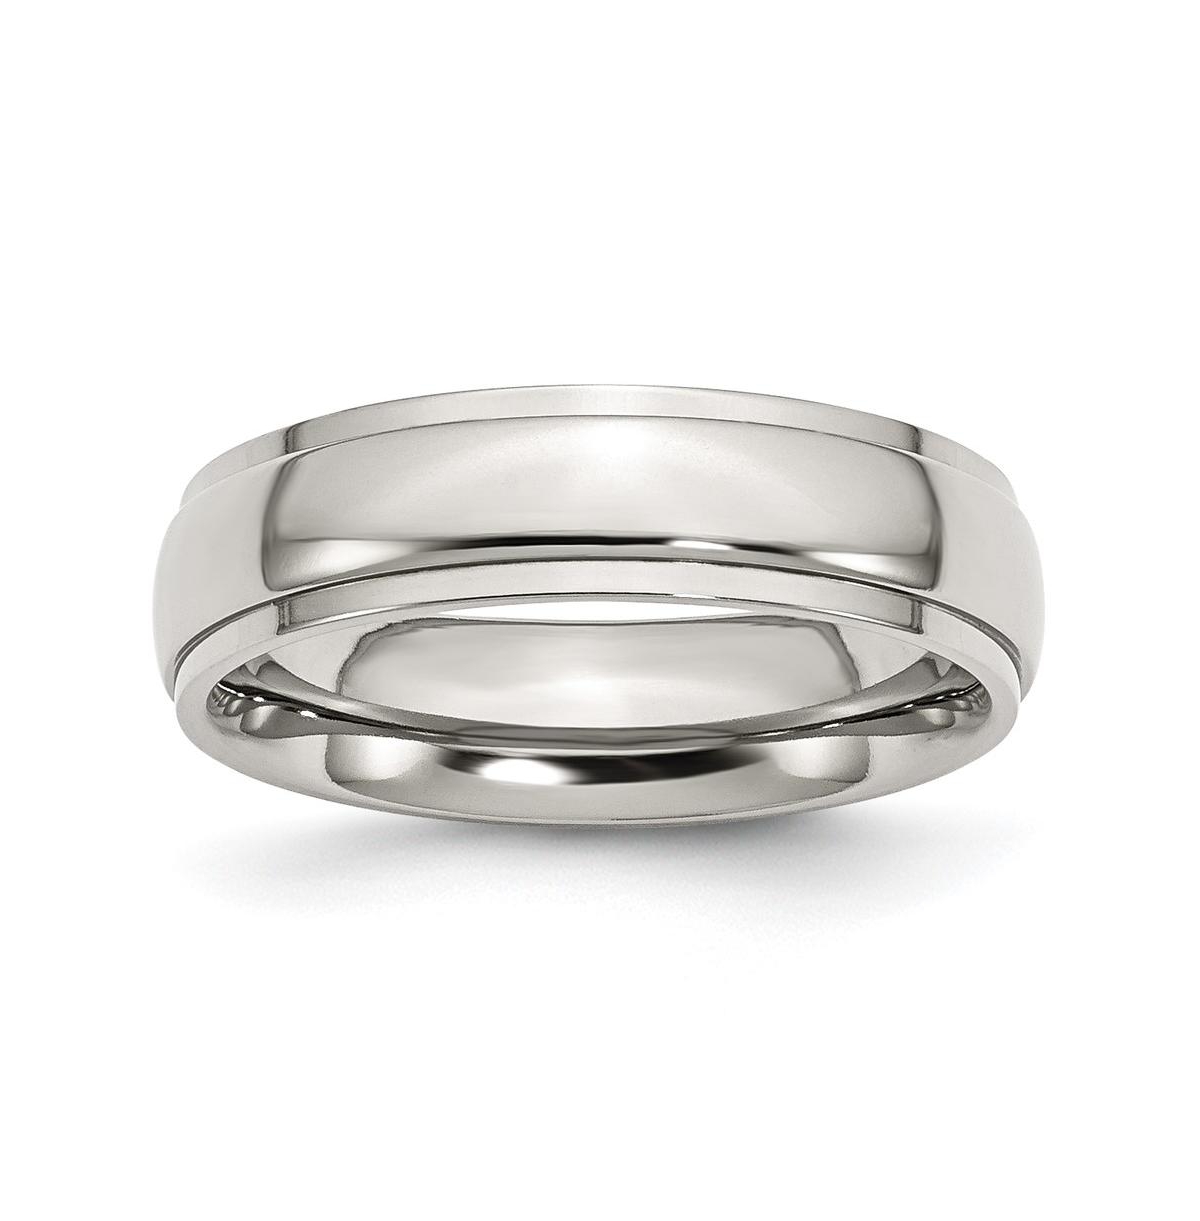 Stainless Steel Polished 6mm Ridged Edge Band Ring - Silver